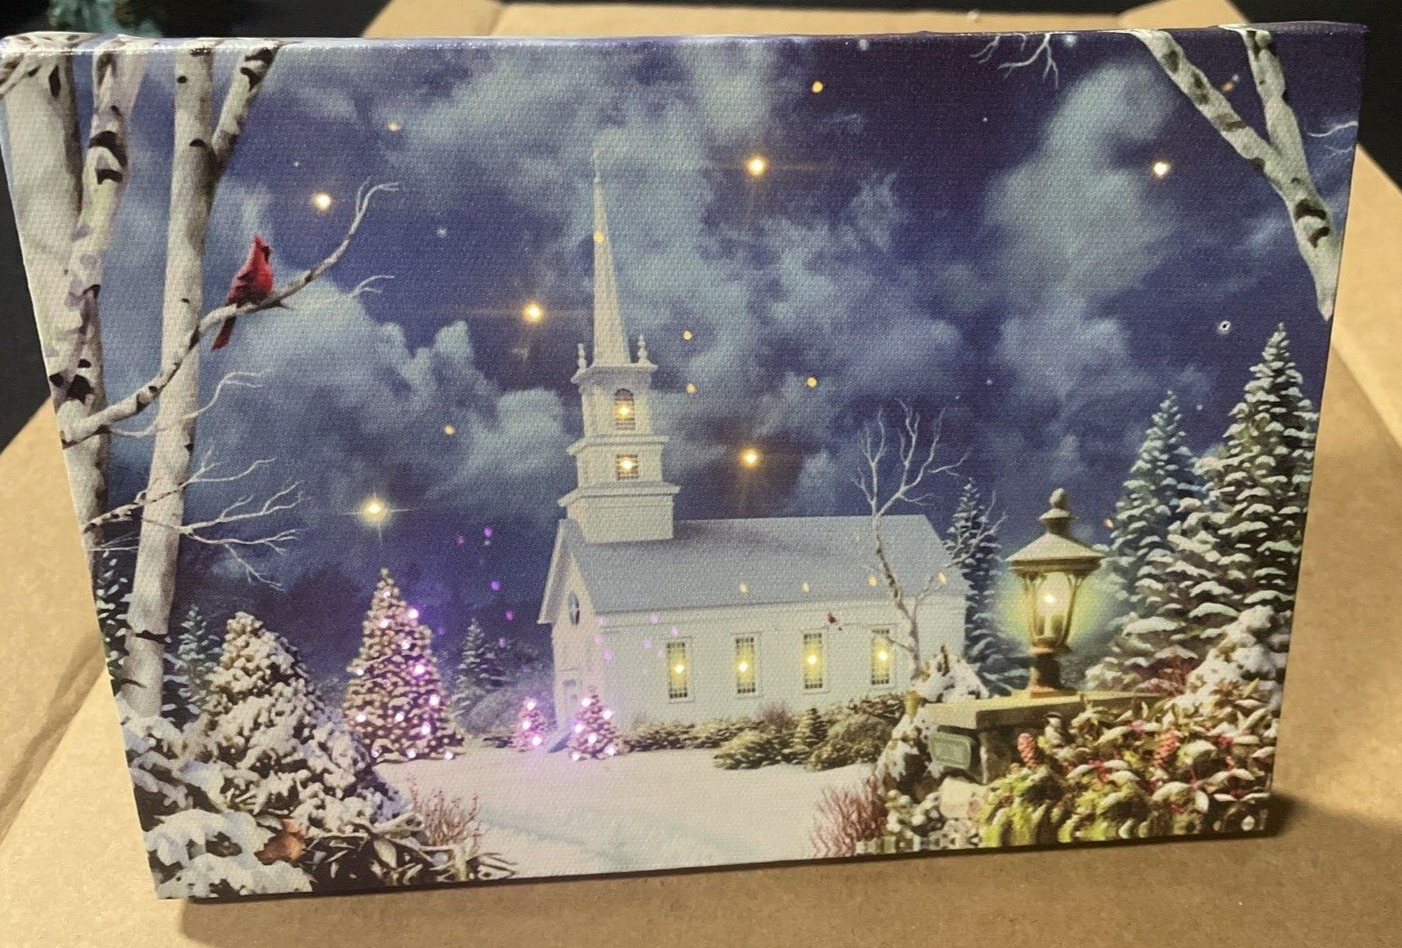 Beautiful Snow Scene With A Church. Church, Trees Sky Light Up & Change Colors